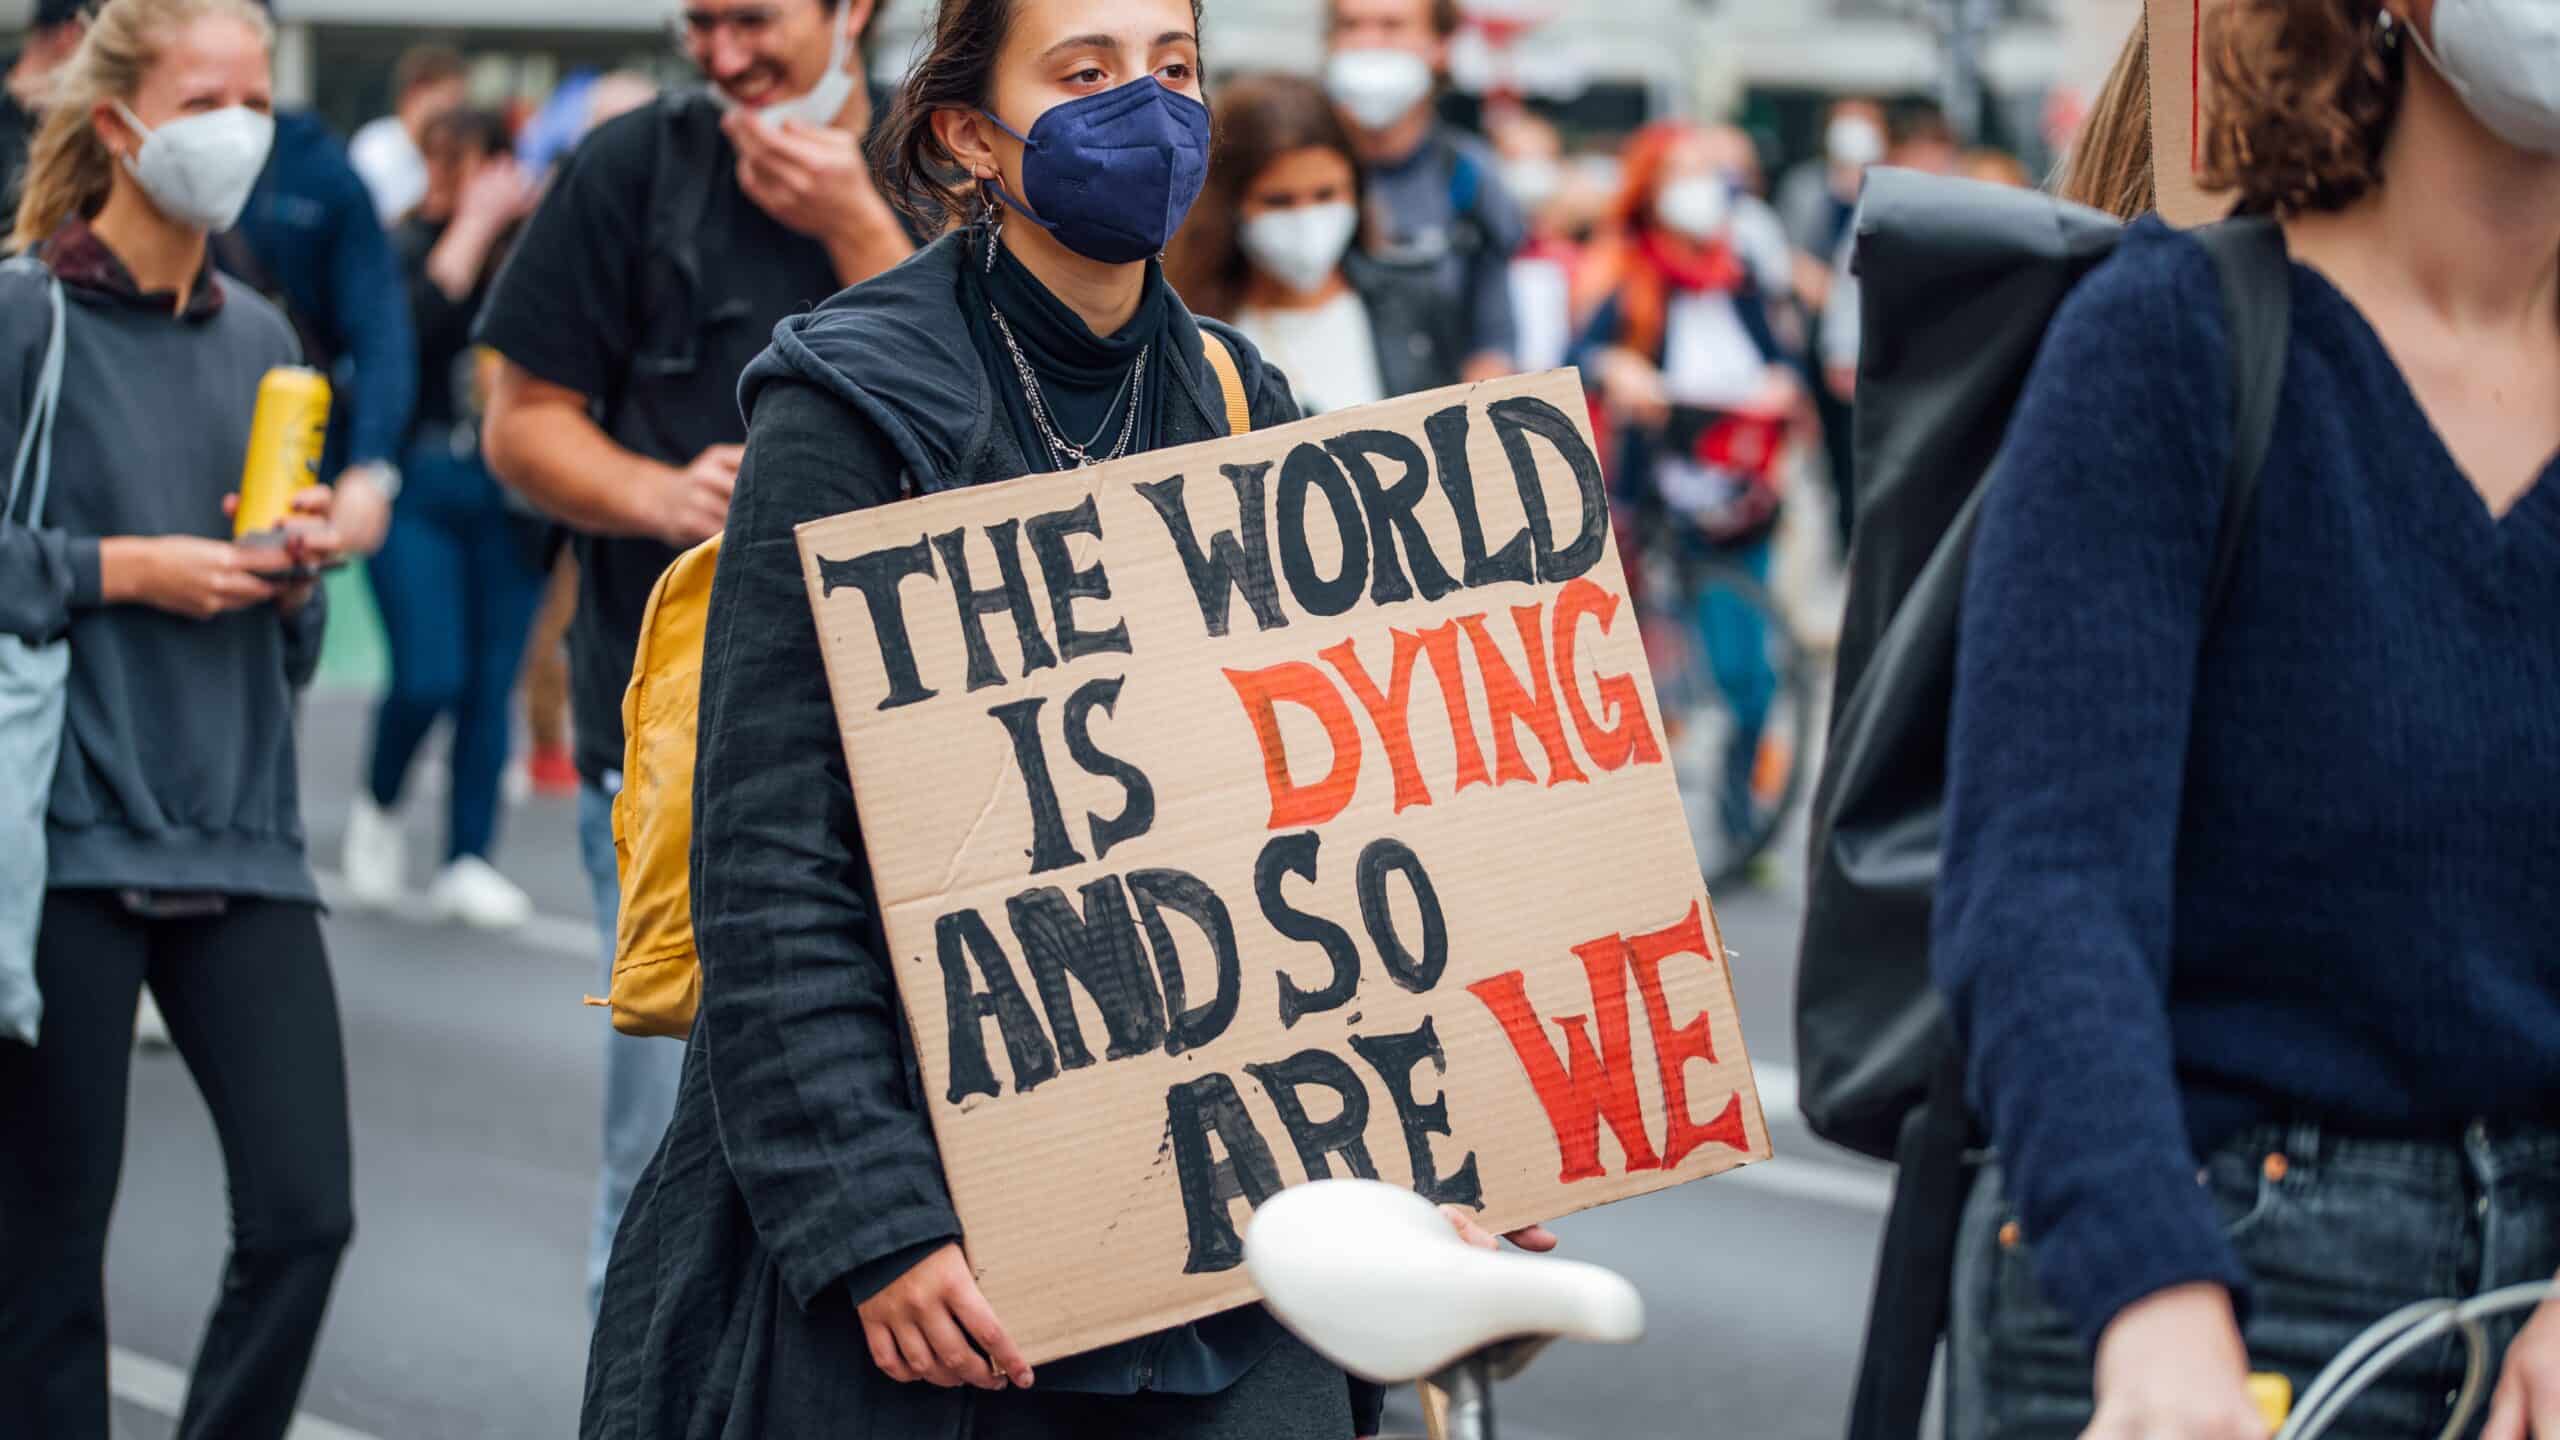 Climate change activist holding a banner with the message "The world is dying and so are we"